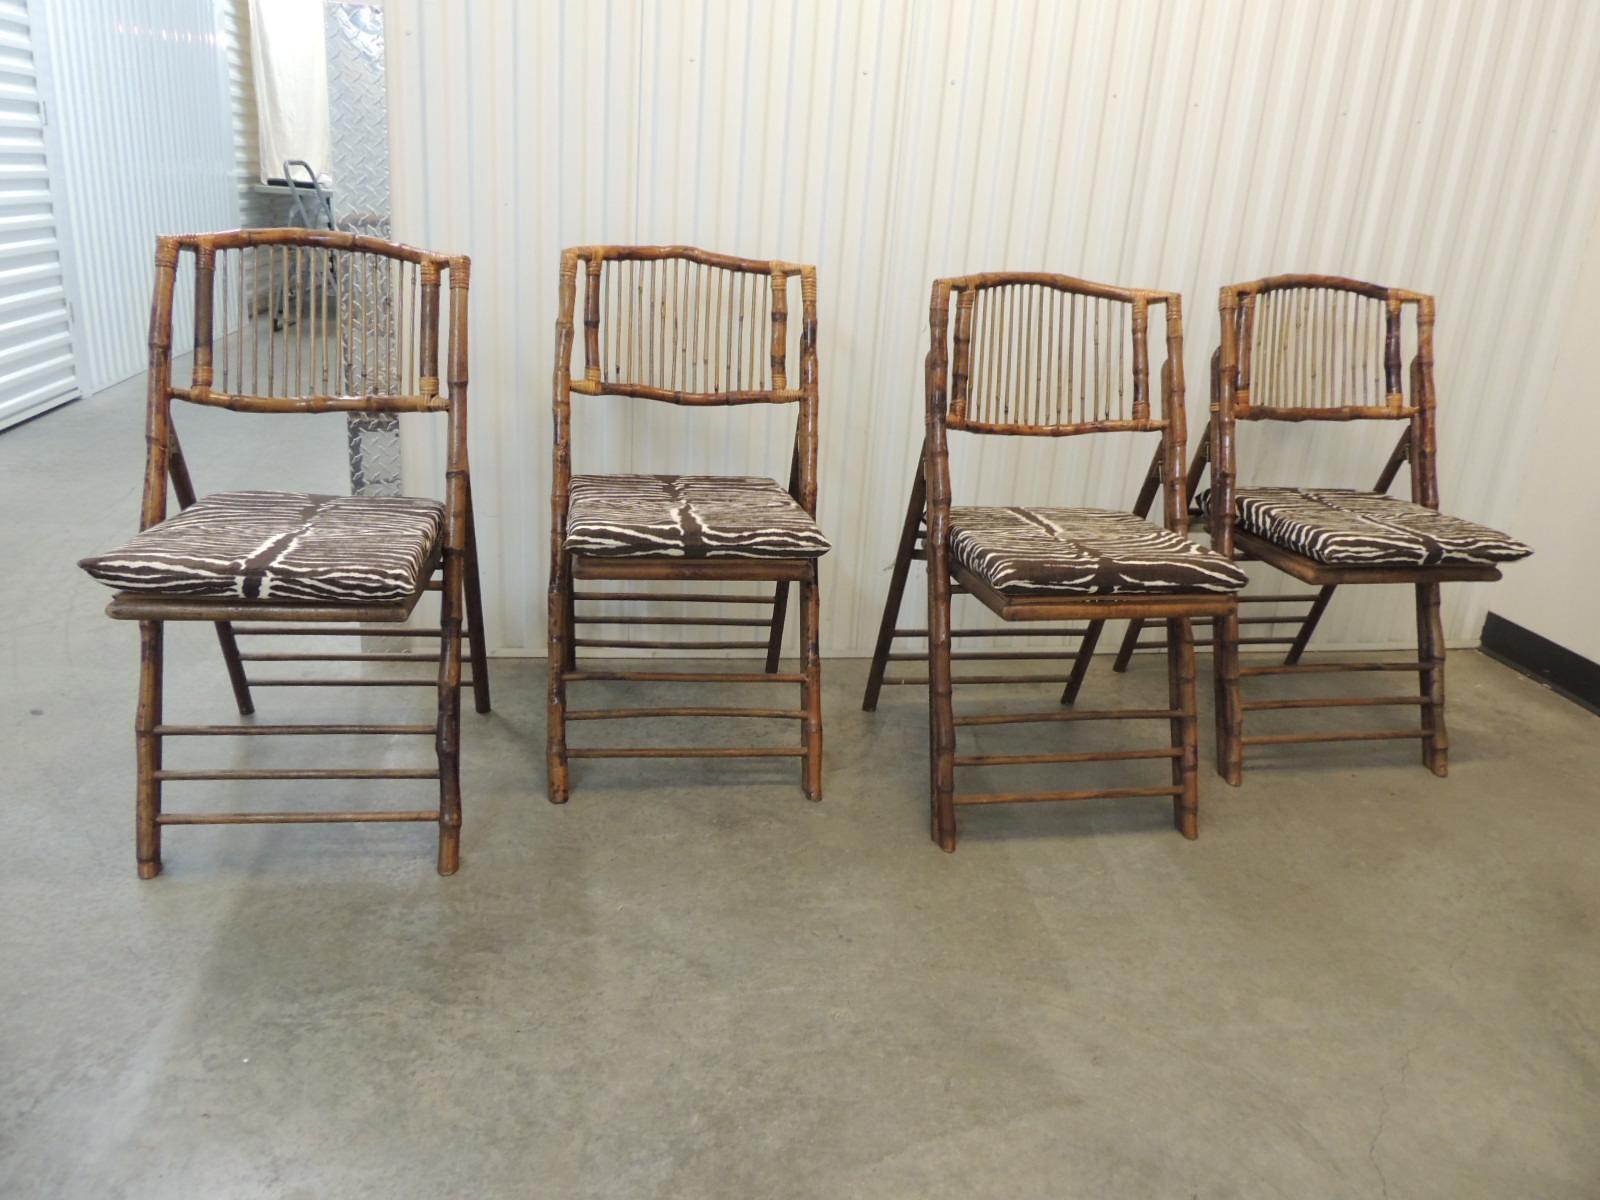 Set of '4' Vintage Tortoise Bamboo Folding Chairs with Seat Cushions 3